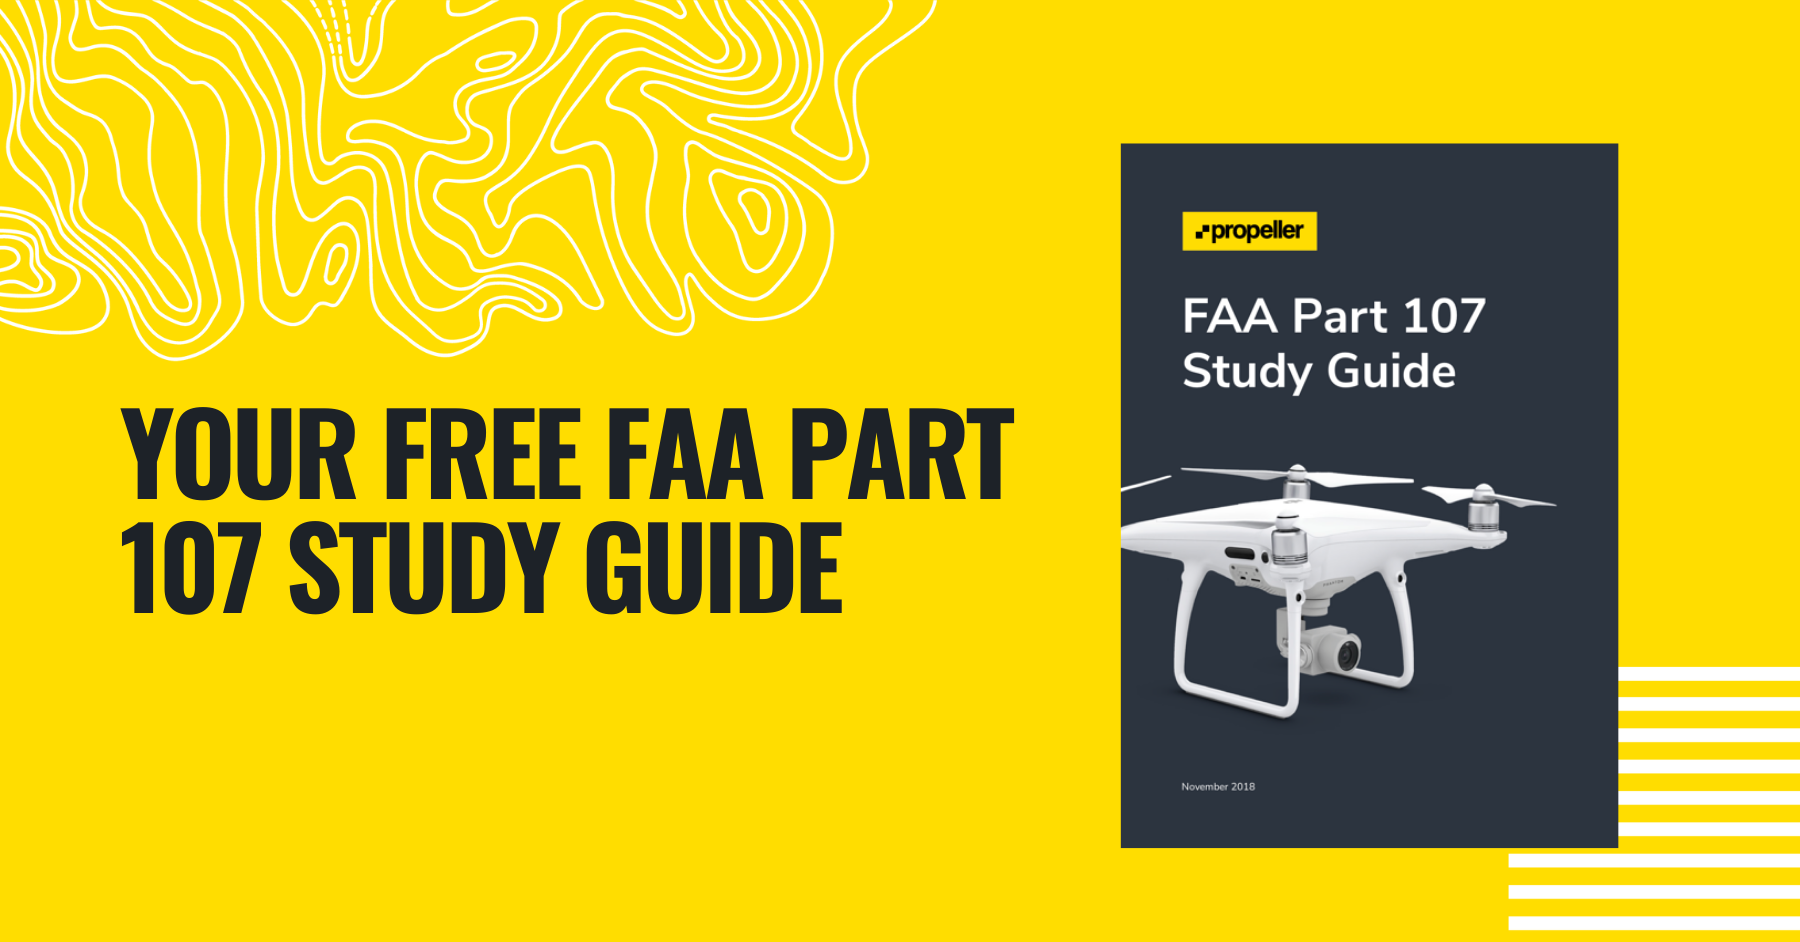 download-your-free-faa-part-107-study-guide